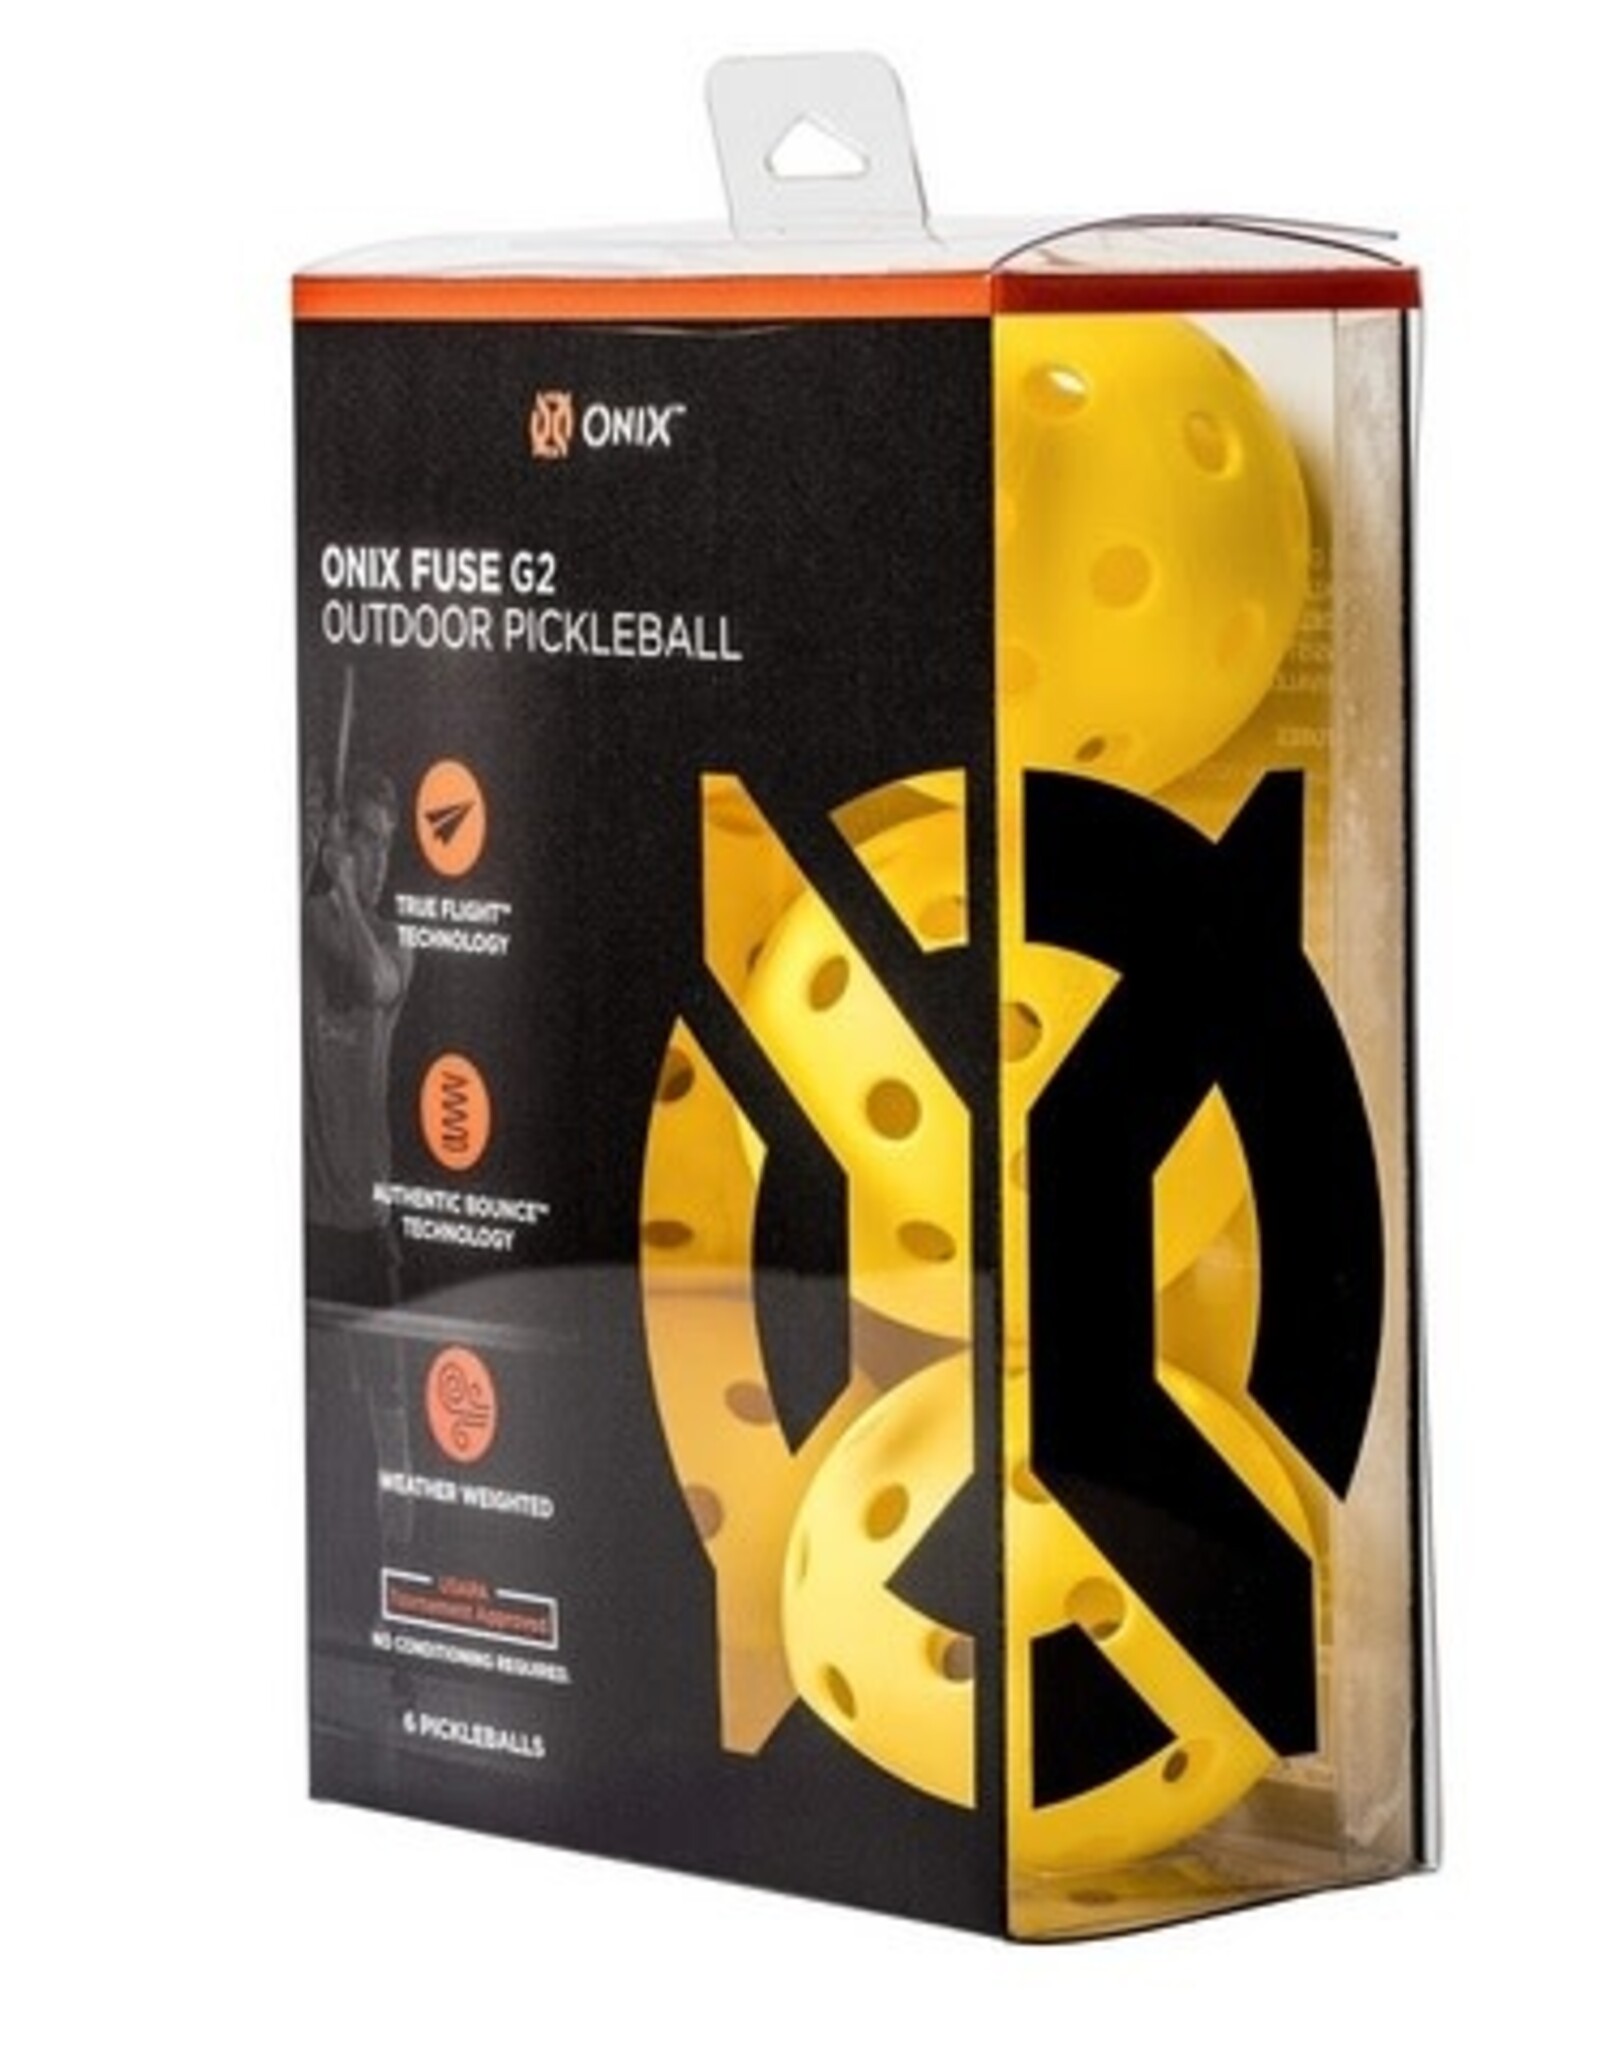 Onix Onix Fuse G2 Outdoor 6pck Pickleball